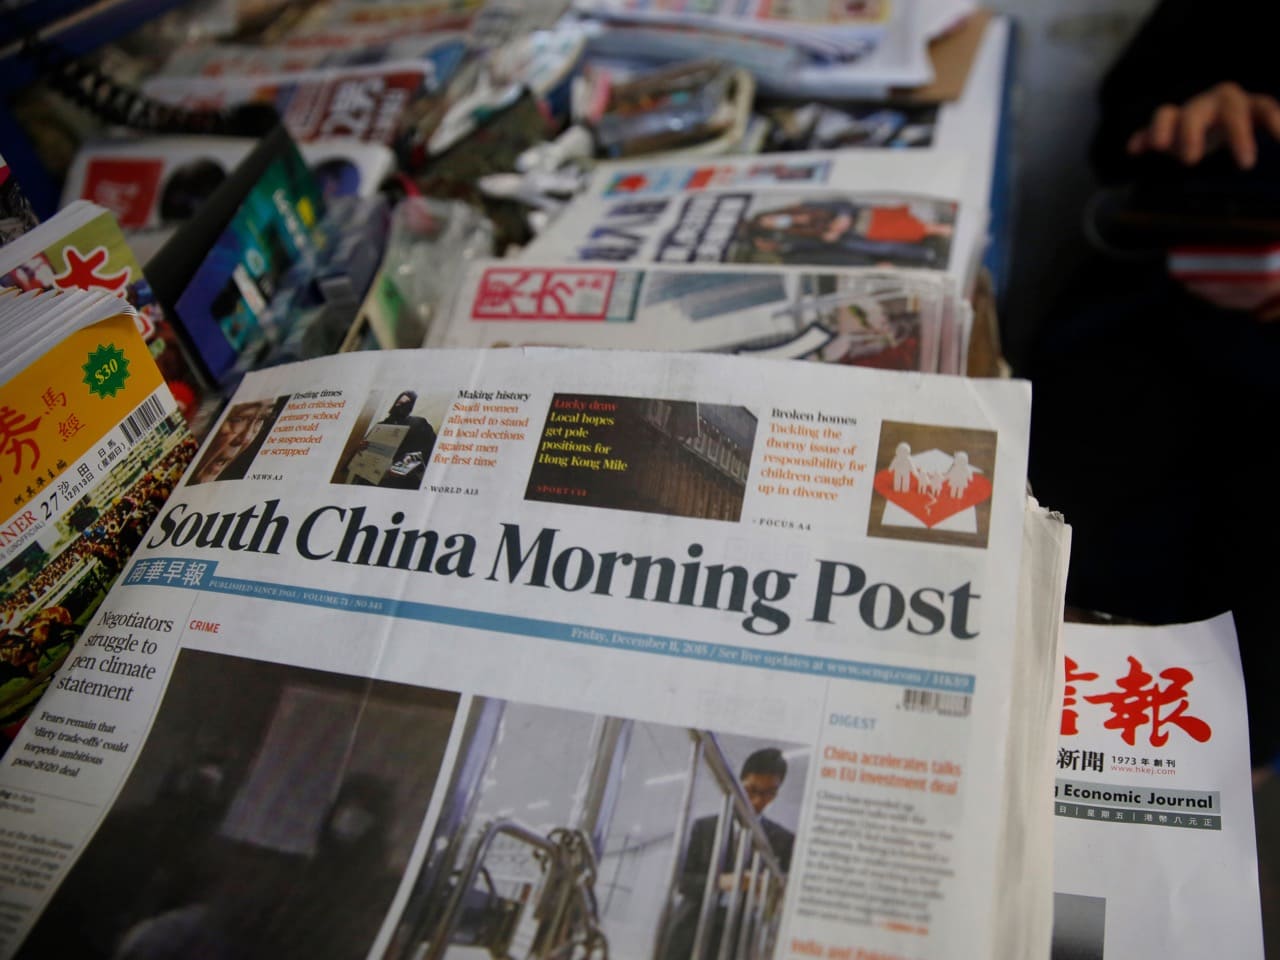 Copies of the "South China Morning Post" and other newspapers are sold at a news stand in Hong Kong, 11 December 2015, AP Photo/Kin Cheung